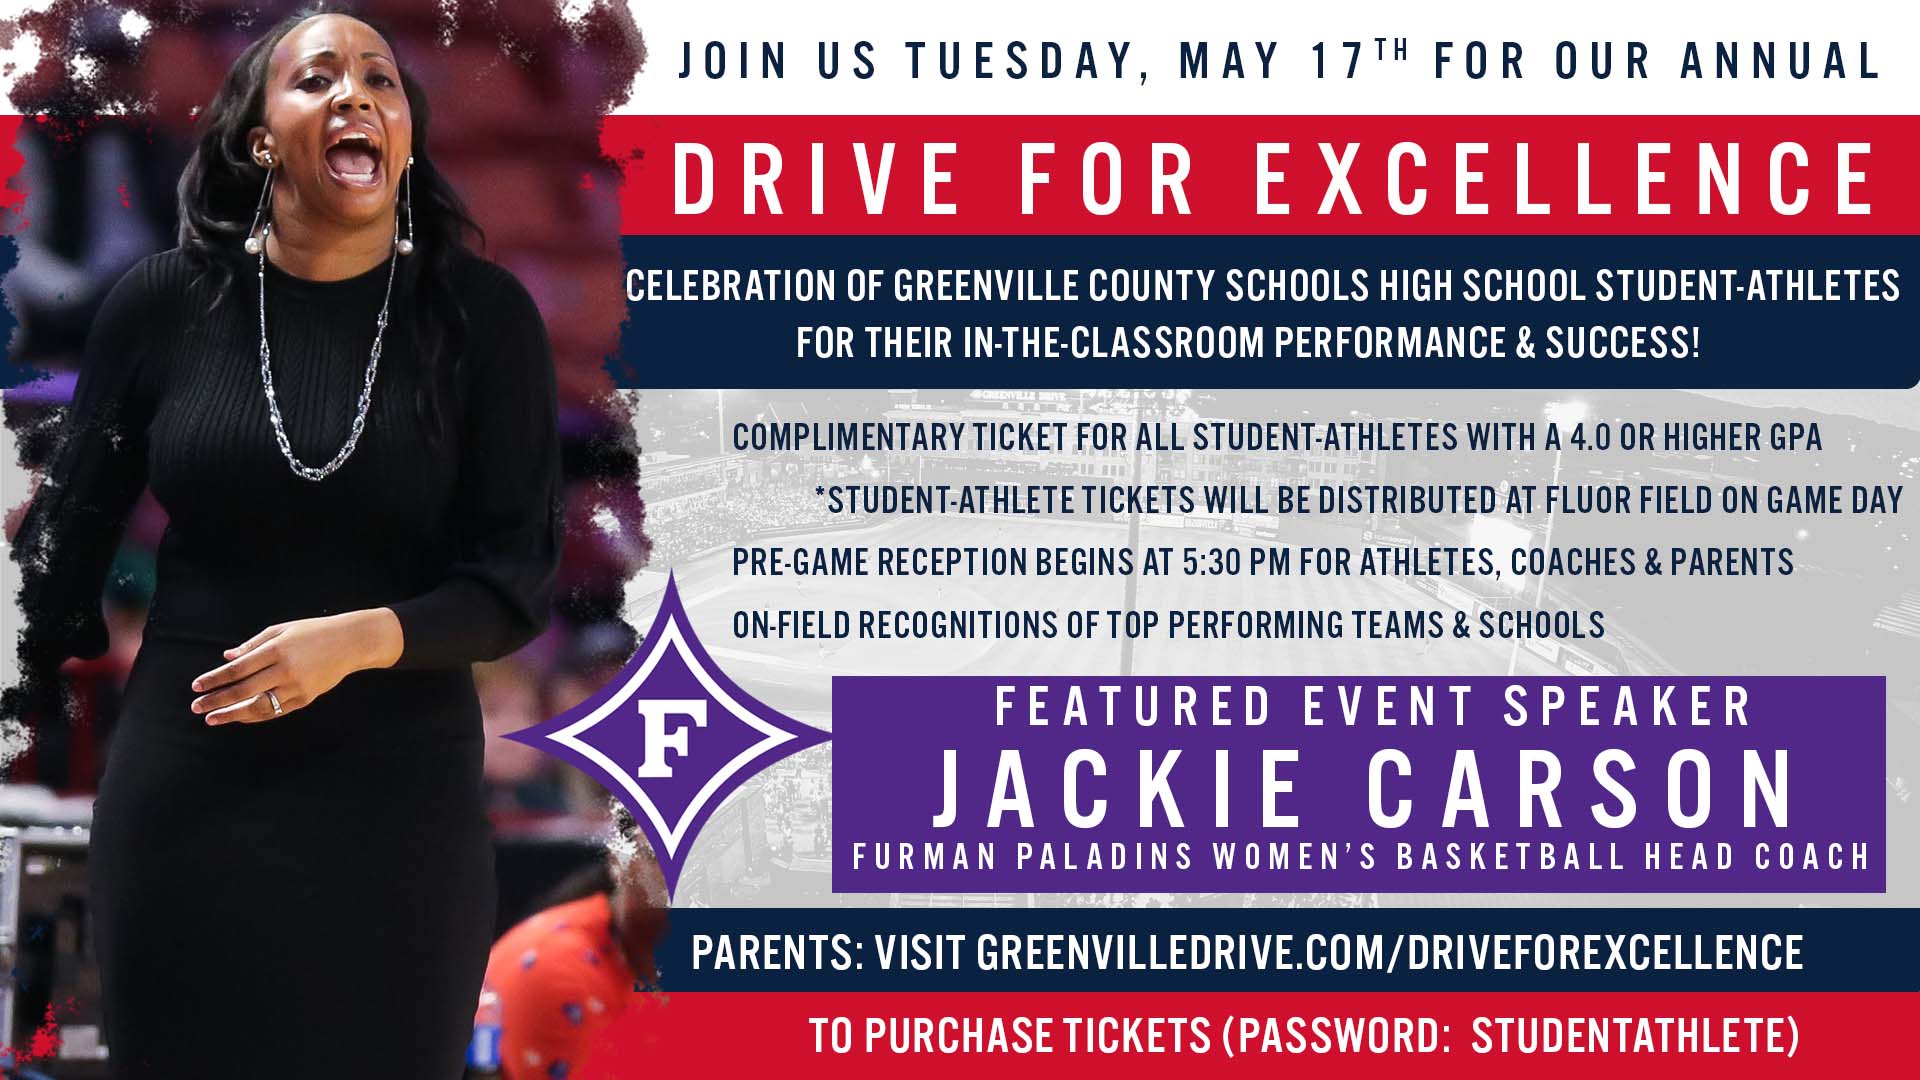 Join us Tuesday, May 17th for our annual drive for excellence celebration of Greenville County Schools High School student-athletes for their in-the-classroom performance & success! Complimentary ticket for all student-athletes with a 4.0 or higher GPA. *student-athlete tickets will be distributed at flour field on game day. Pre-game reception begins at 5:30 for athletes, coaches, & parents. On-field recognitions of top performing teams and schools. Featured Event Speaker: Jackie Carson, Furman Palading Women’s basketball head coach. Parents: Visit greenvilledrive.com/driveforexcellence to purchase tickets (password:studentathlete)